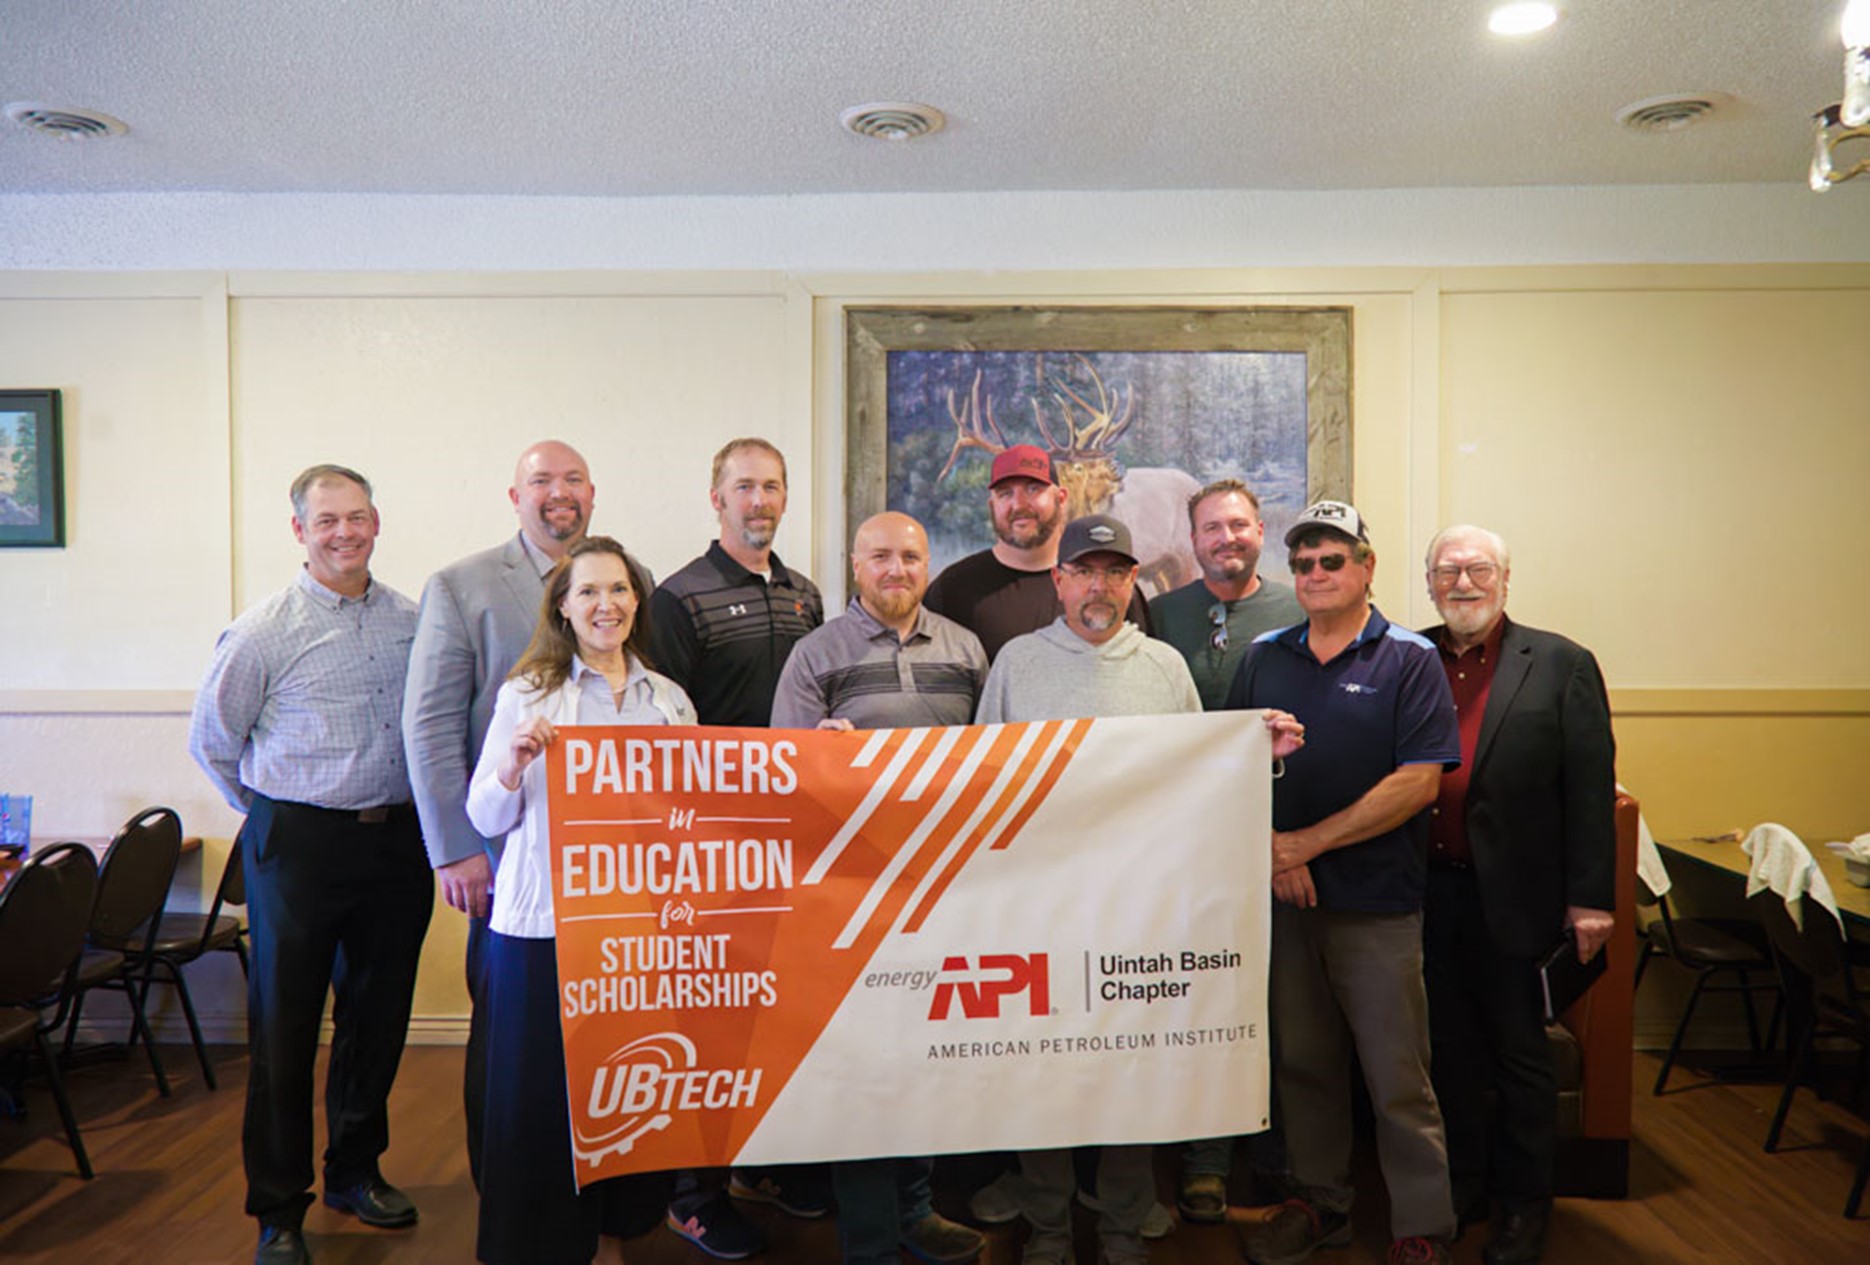 The local Uintah Basin Chapter of the API organization partnered with UBTech to donate scholarships. Pictured from left to right, Mark Dockins, UBTech VP of Instructional Services; Aaron Weight, UBTech President; Heather Lowry, Chief Development Officer; Seth Taylor, Director of Energy Services; Andrew Kraft, Uintah Basin API Chairman; Jason Simonton, Golf Committee Chairman; Brandon Jaramillo, API Uintah Basin member; Scott Simonton, Uintah Basin API Vice Chairman; Lynn Labrum, API Uintah Basin member; and Steven Rogers, API Uintah Basin member.